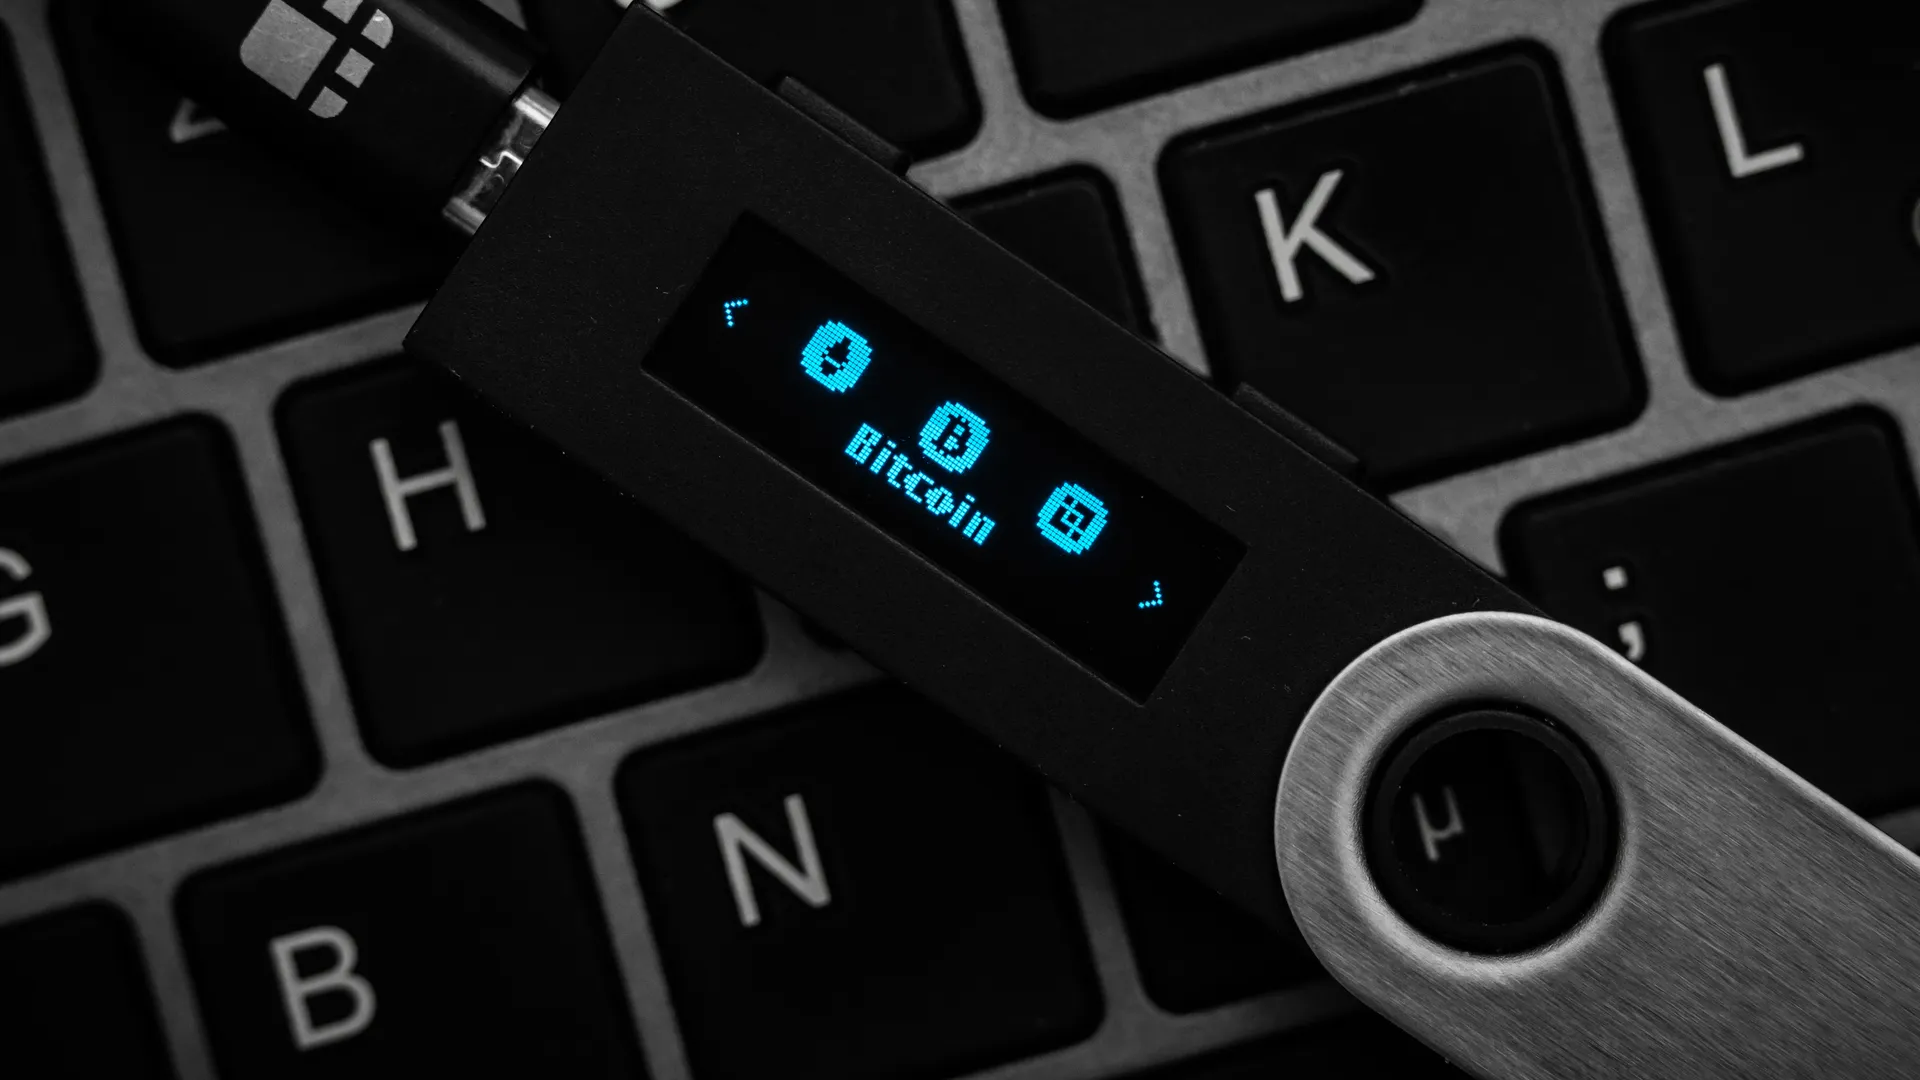 Ledger CEO says ‘sharded’ wallet keys could be shared if subpoenaed